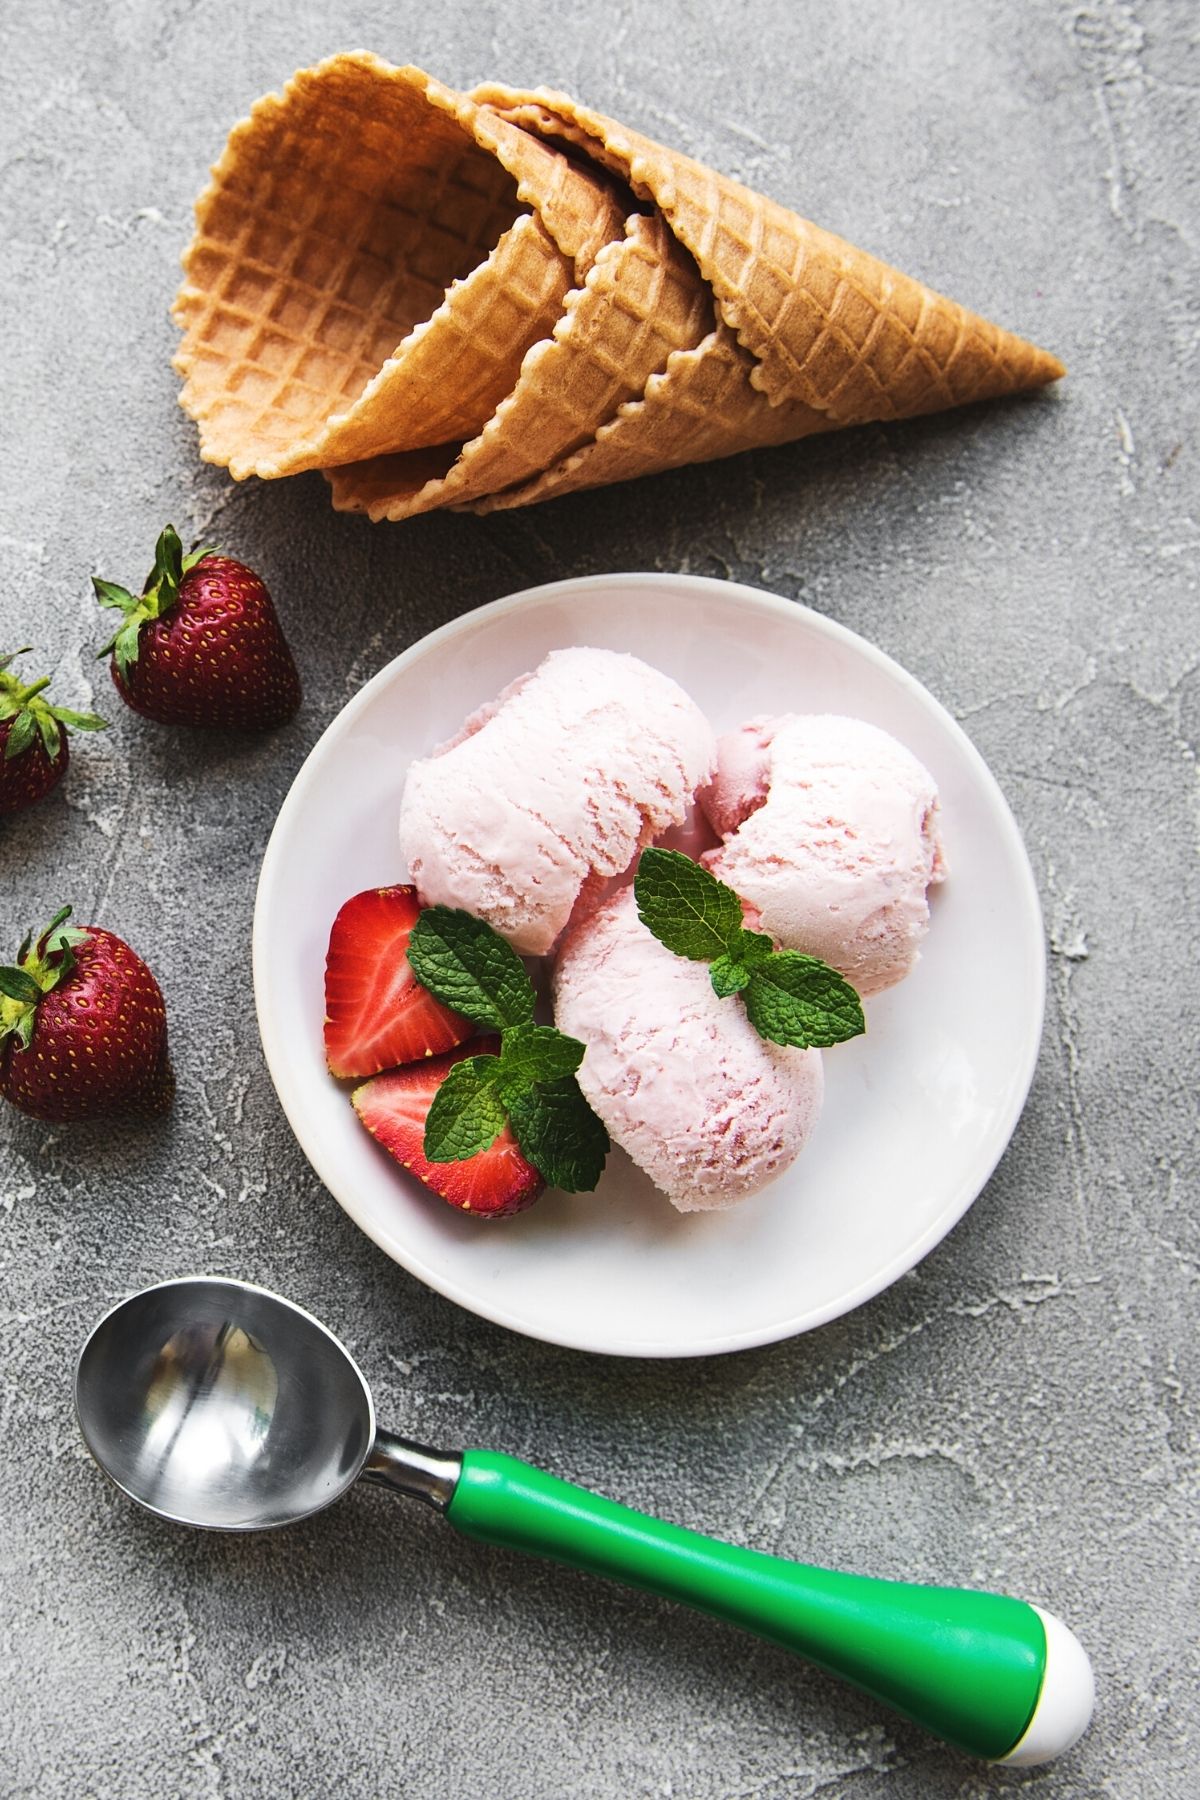 vegan strawberry ice cream served with fresh strawberries and waffle cones.